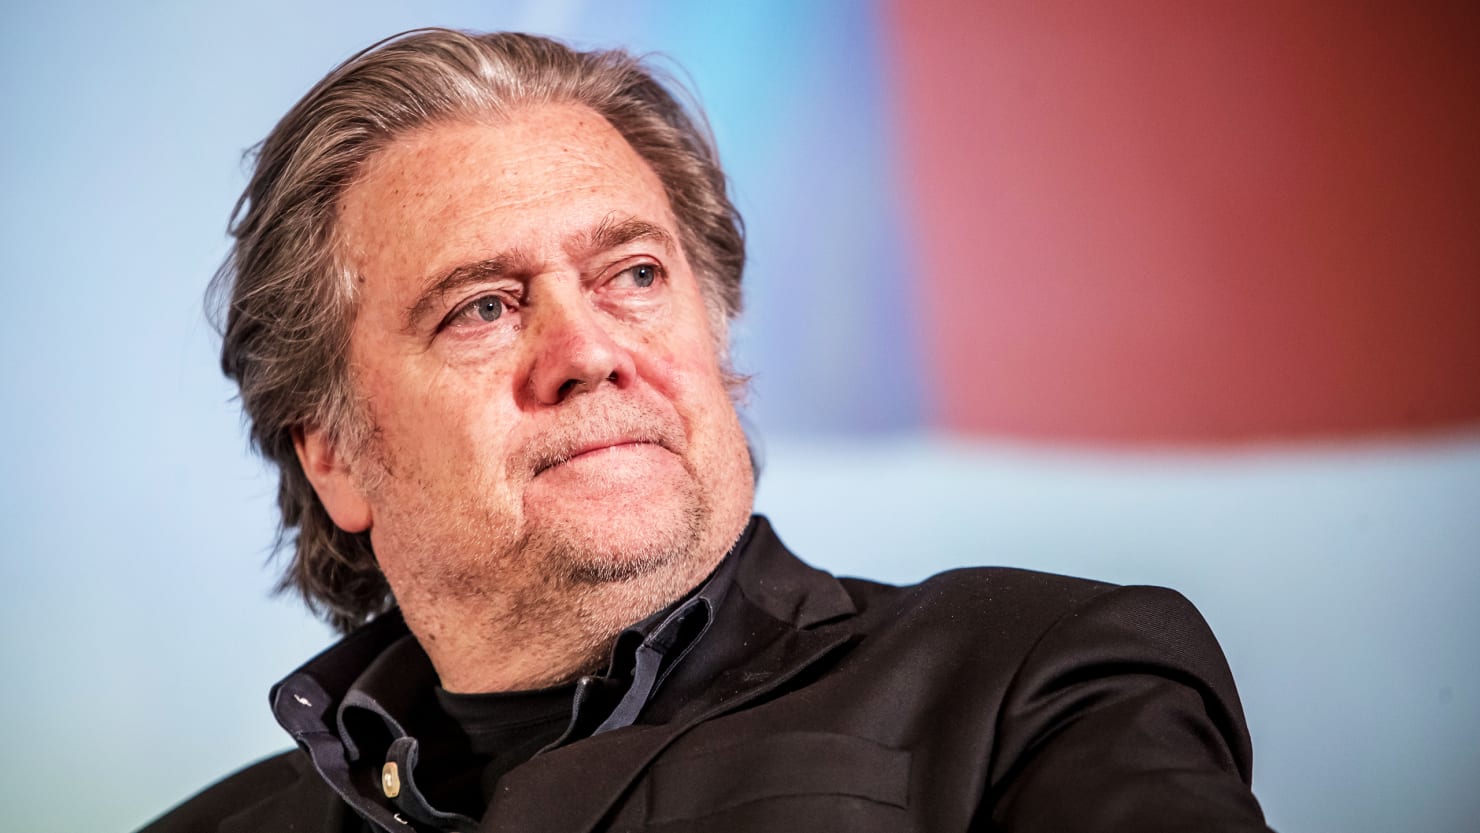 Bannon on Brazil riots: 'I'm not backing off 1 inch' - POLITICO